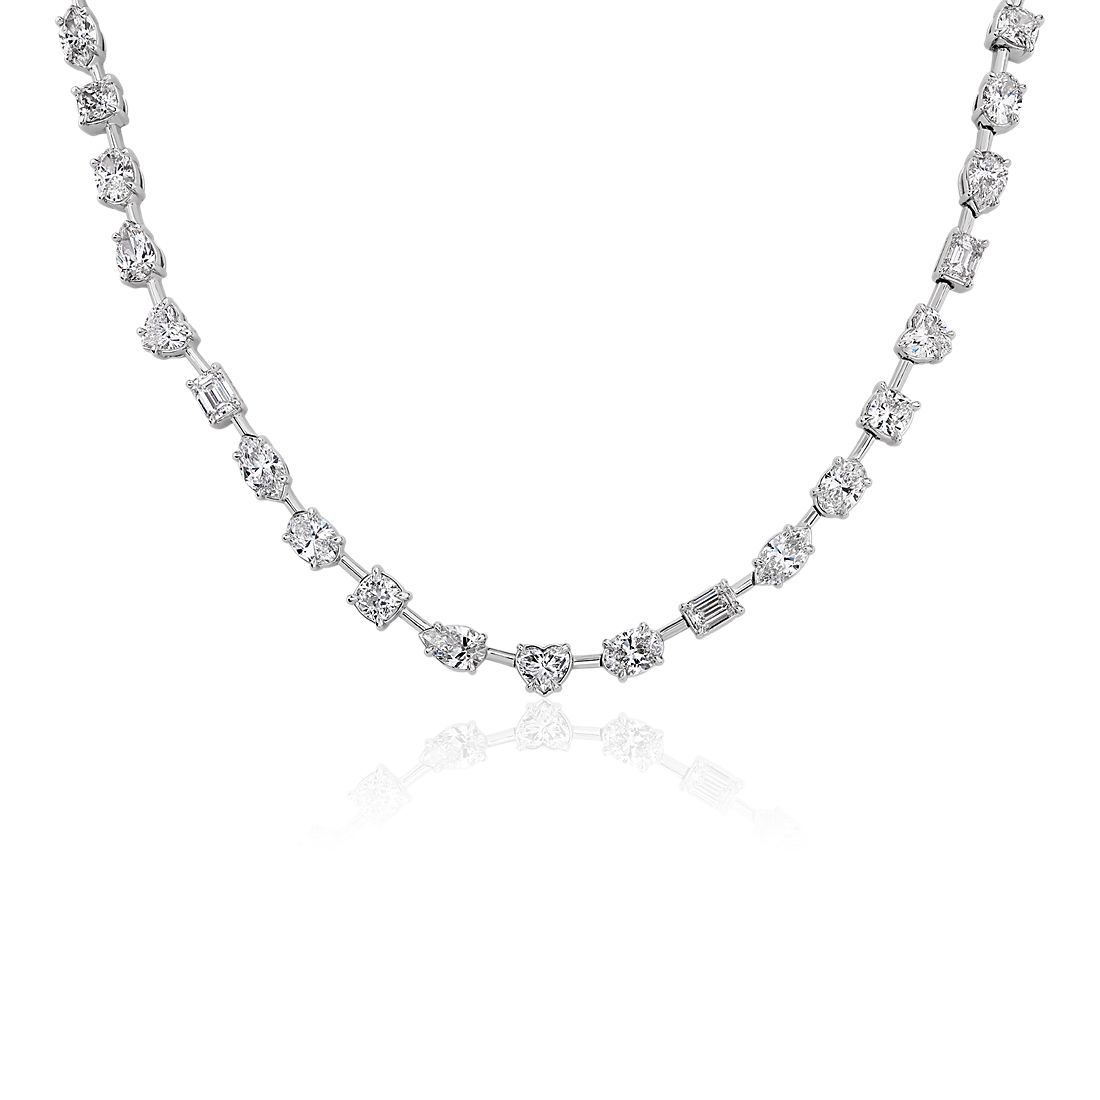 Mixed Fancy Shape Diamond Eternity Necklace in 18k White Gold (15 1/3 ct. tw.)